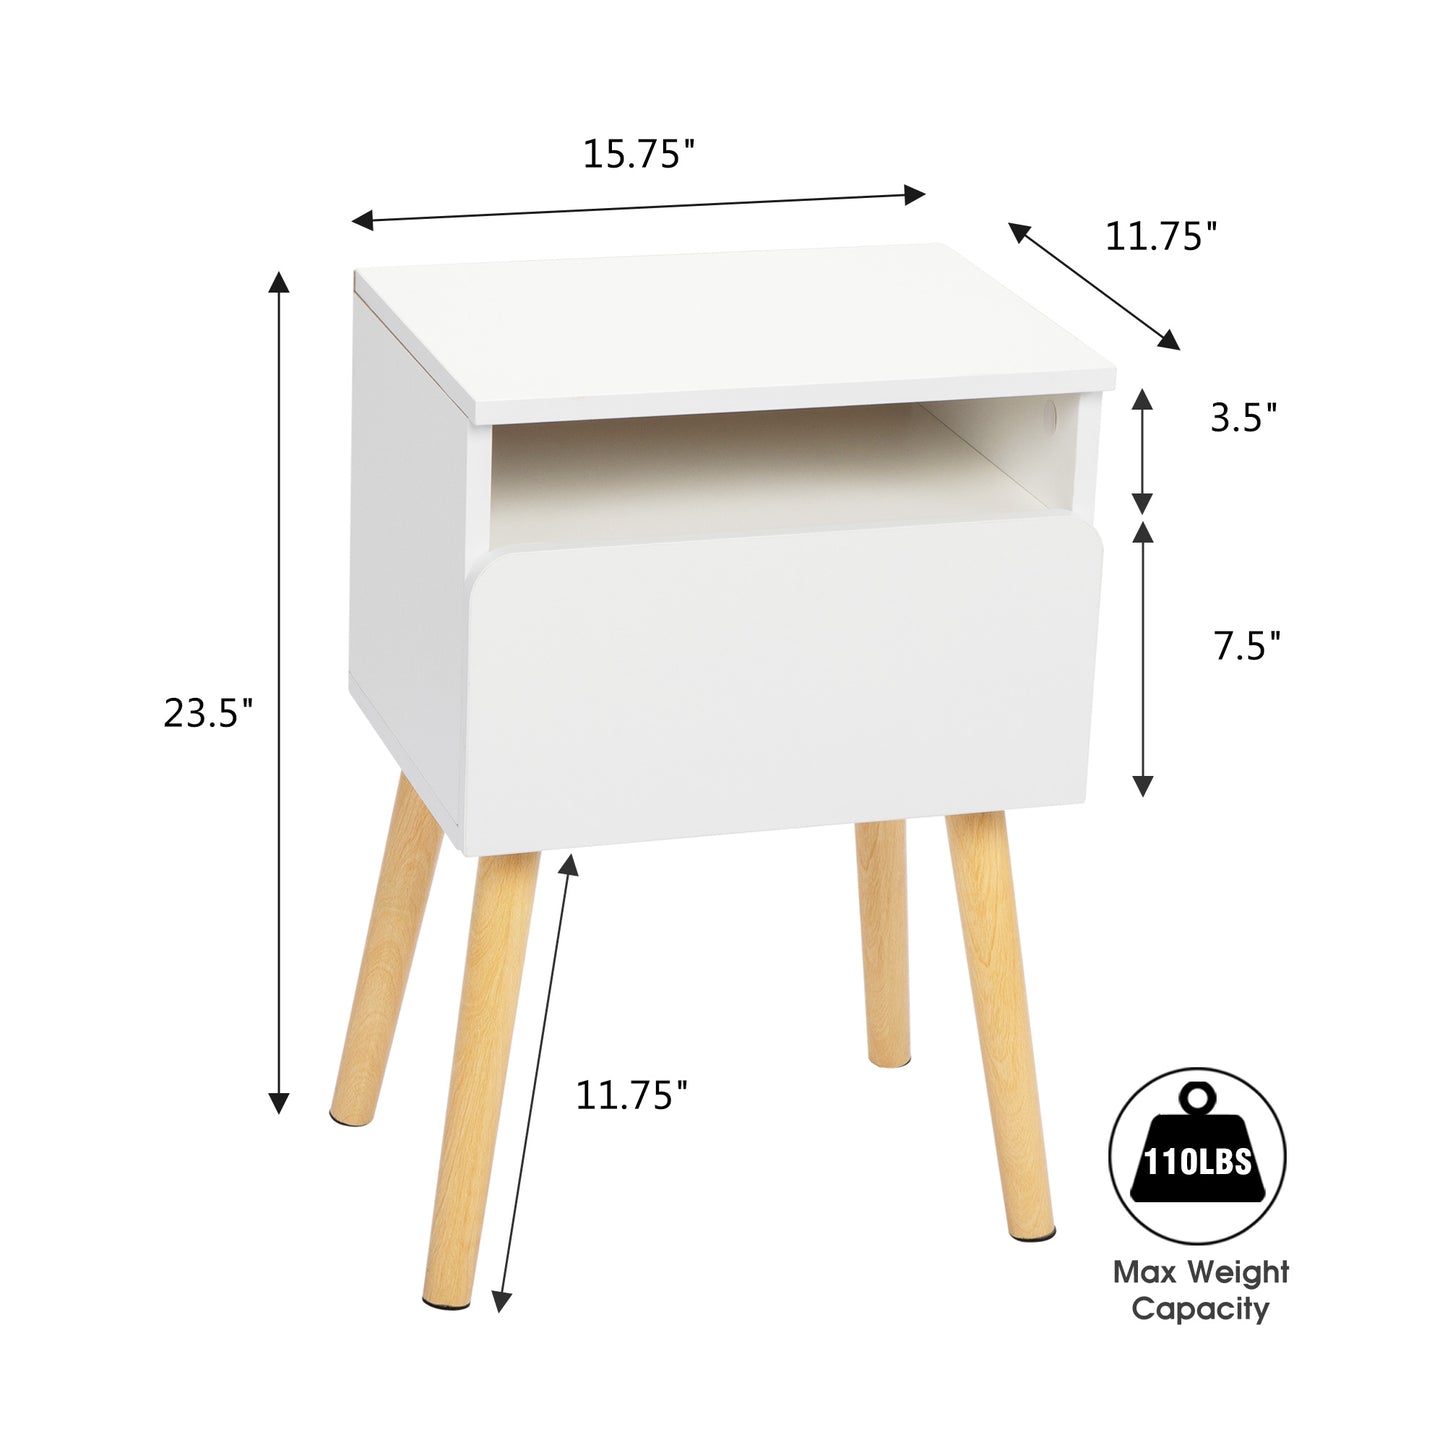 SYNGAR End Table Set of 2, Modern Bed Side Table Nightstand with Drawers, Bedside Table for Bedroom, White, LJ161